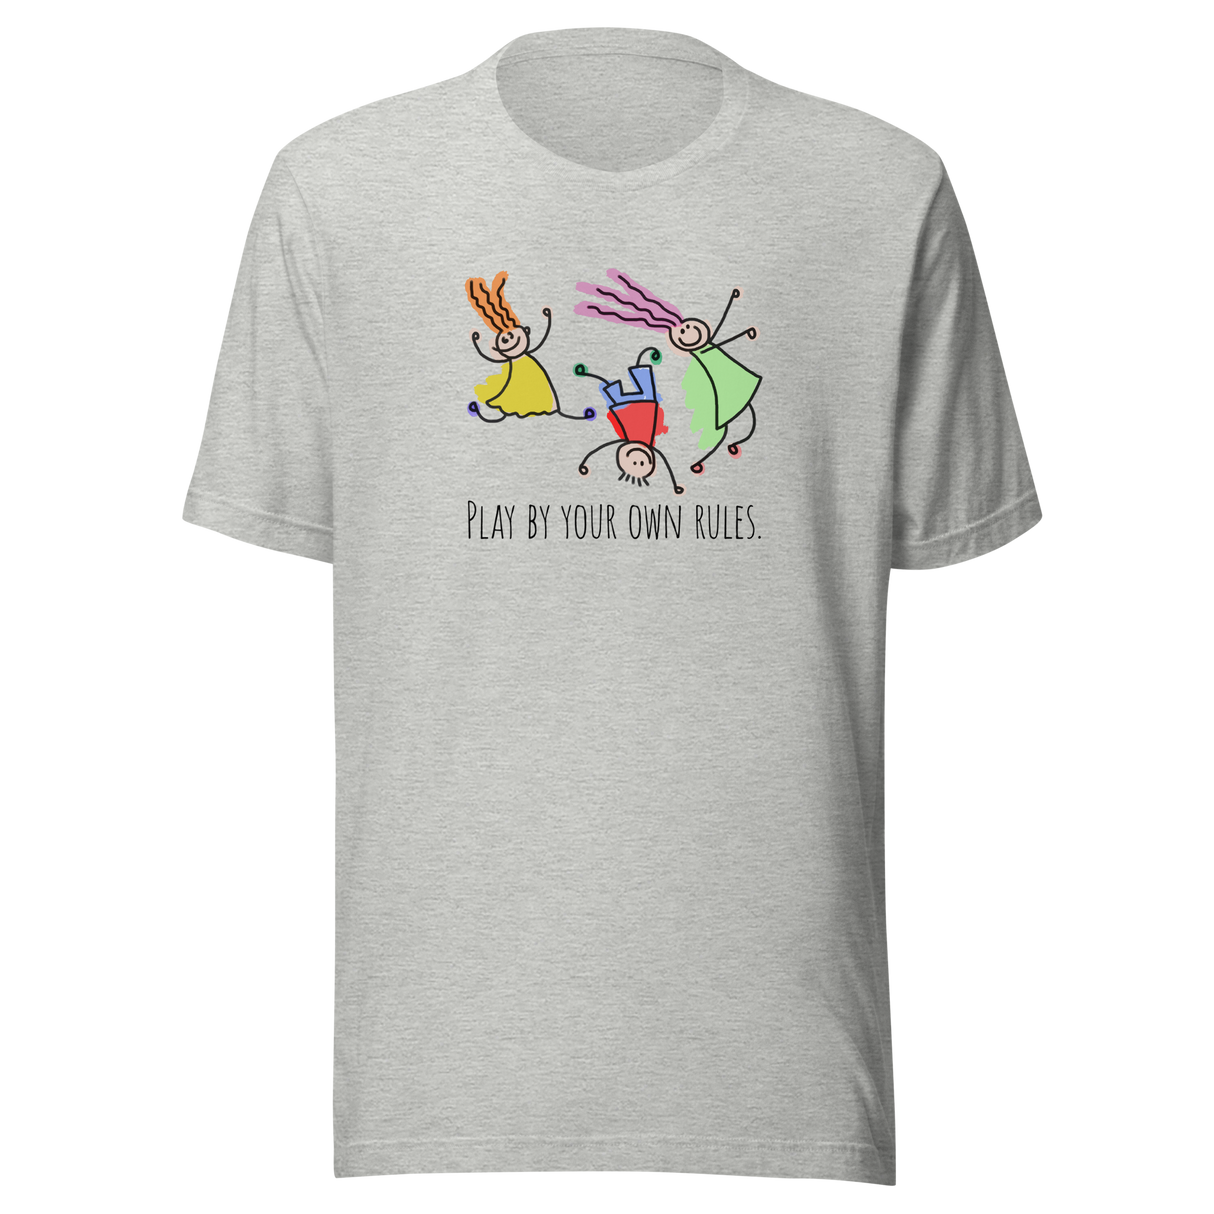 play-by-your-own-rules-achieve-tee-dreams-t-shirt-attitude-tee-inspirational-t-shirt-motivational-tee-1#color_athletic-heather